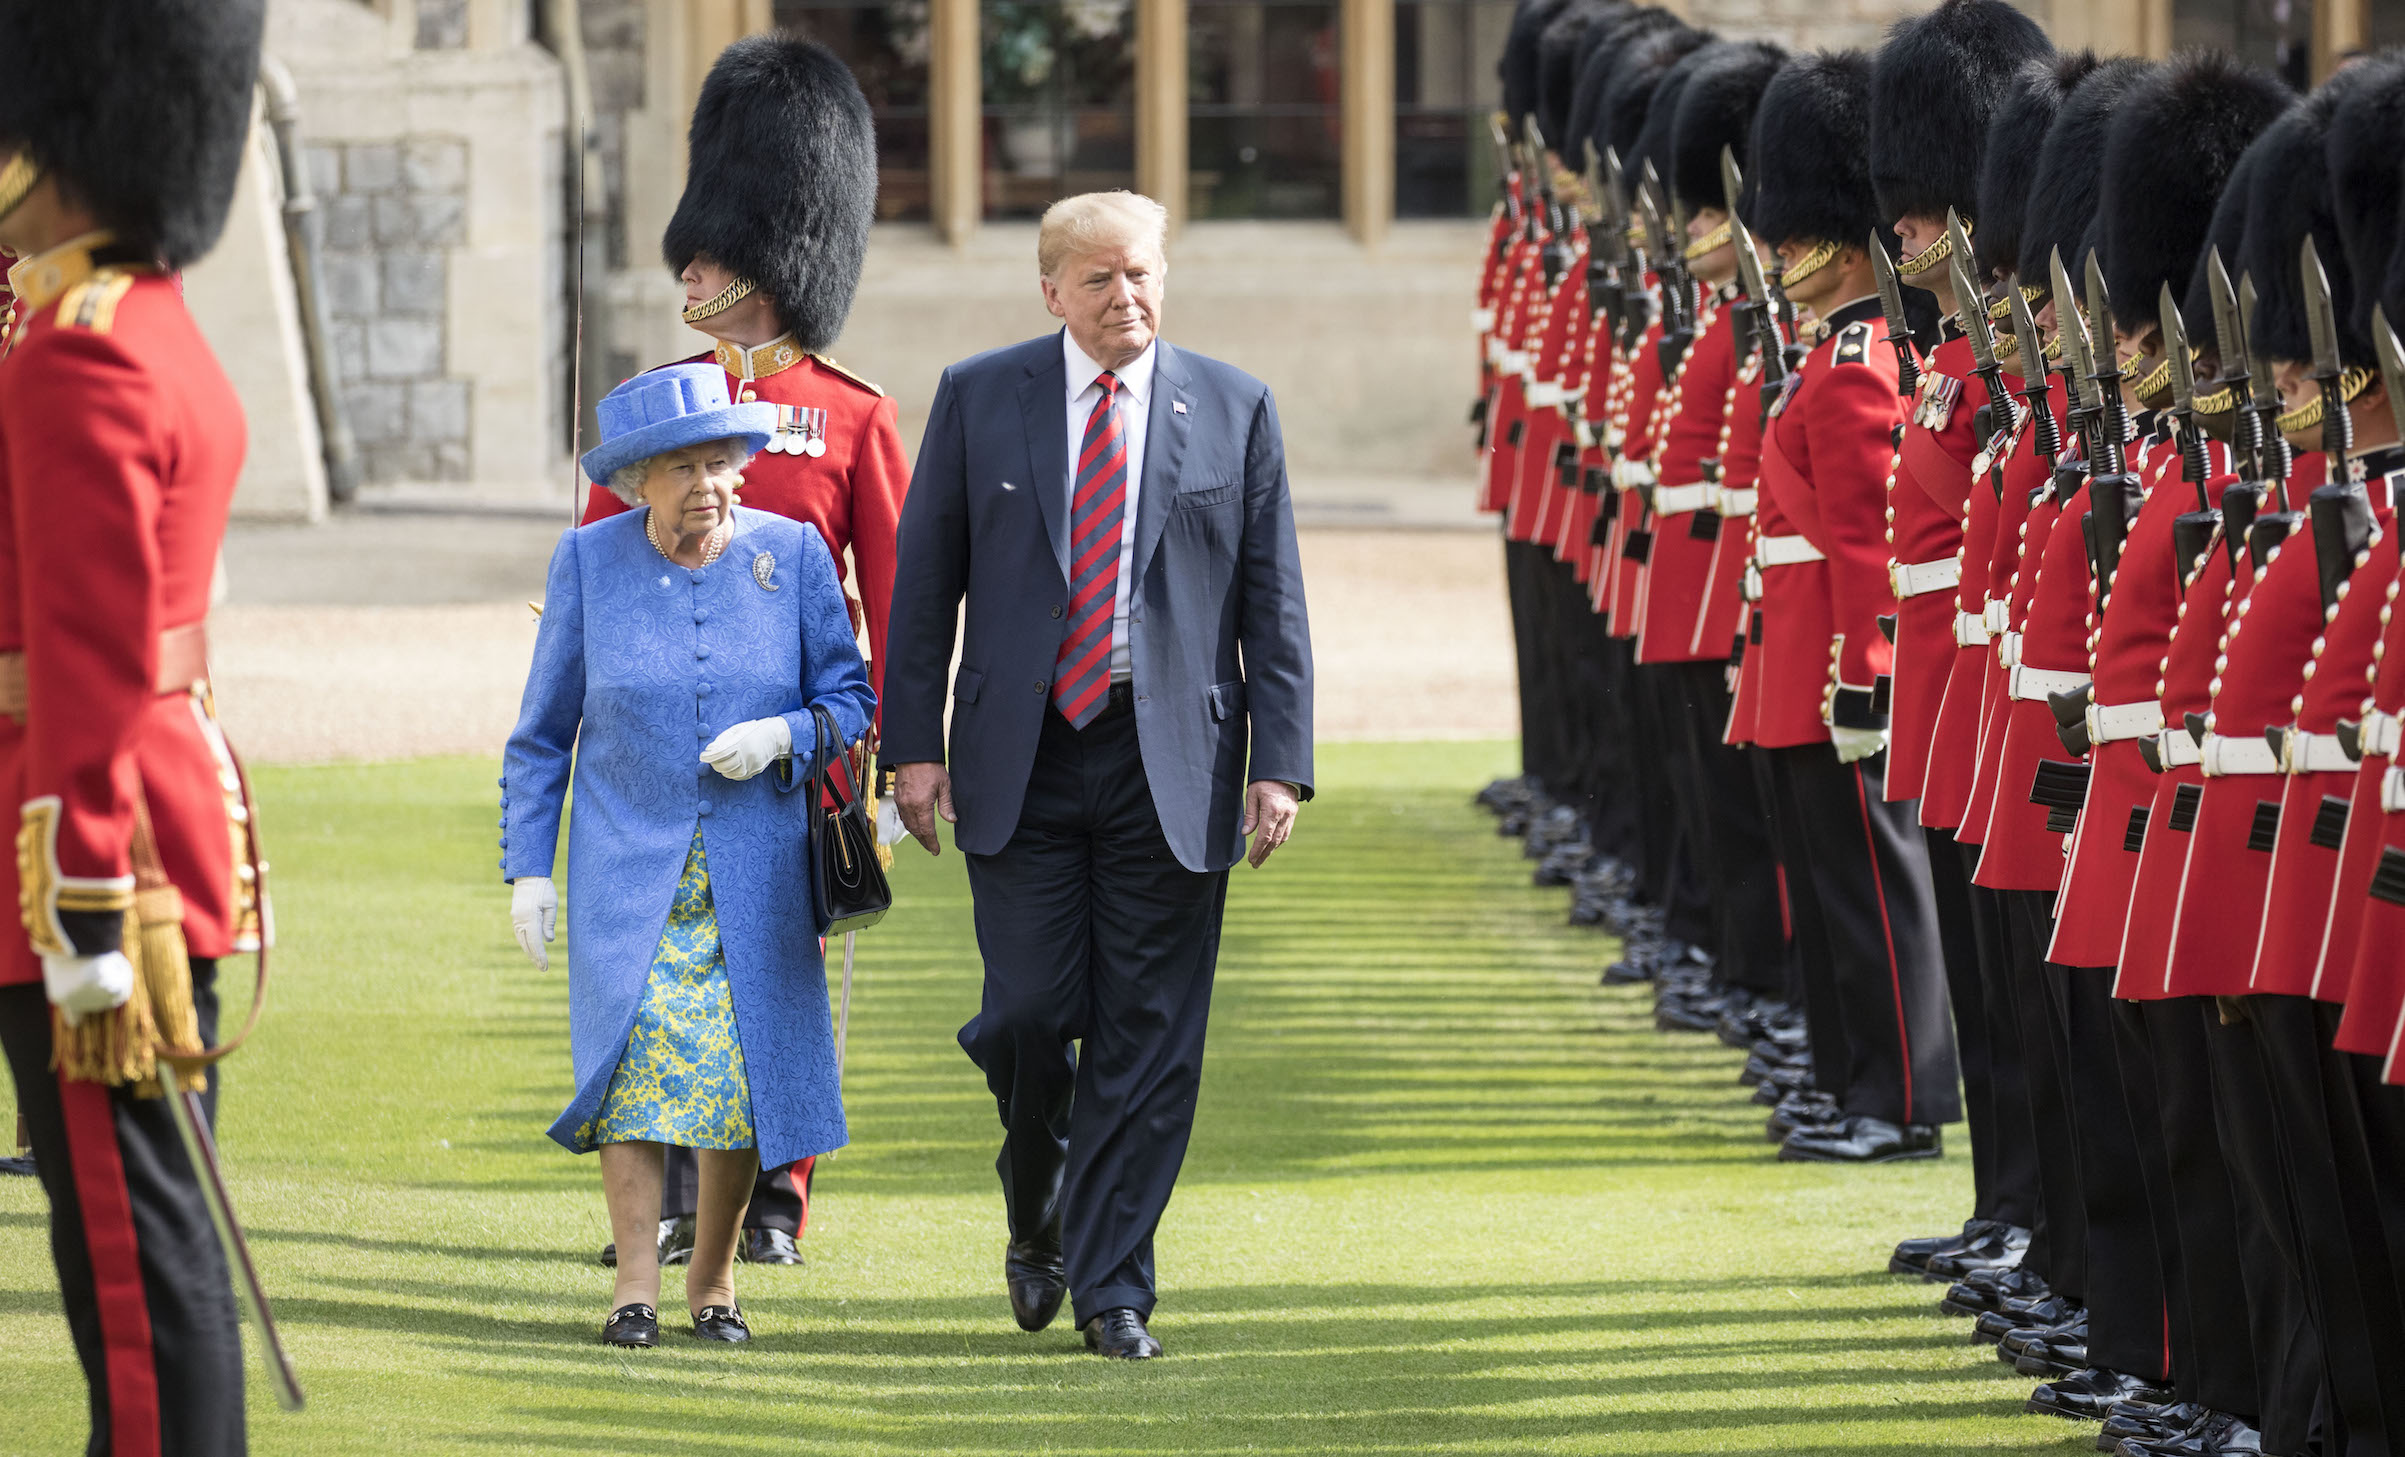 The Queen walks with President Trump as they inspect the Coldstream guards at Windsor castle on July 13, 2018. (Times Photographer Richard Pohle—Getty Images)